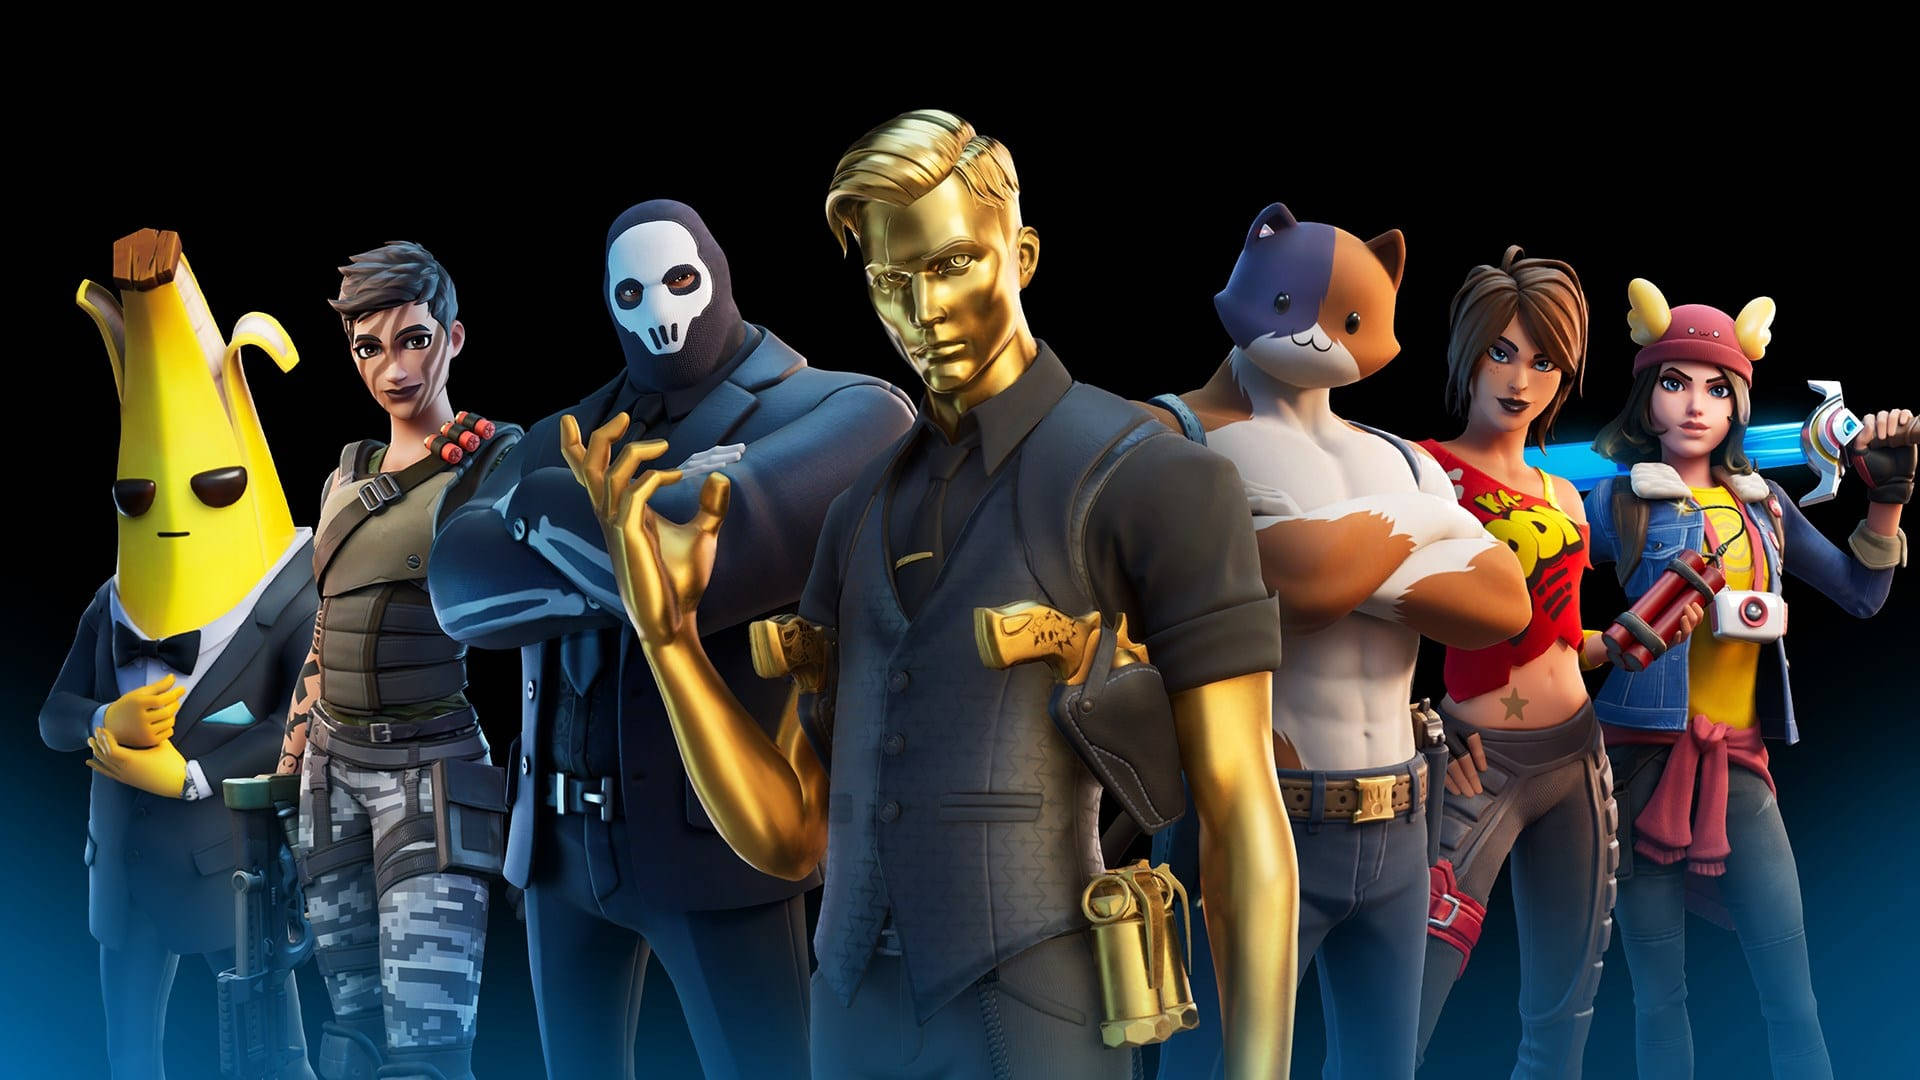 Fortnite - A Group Of People In Costumes Wallpaper